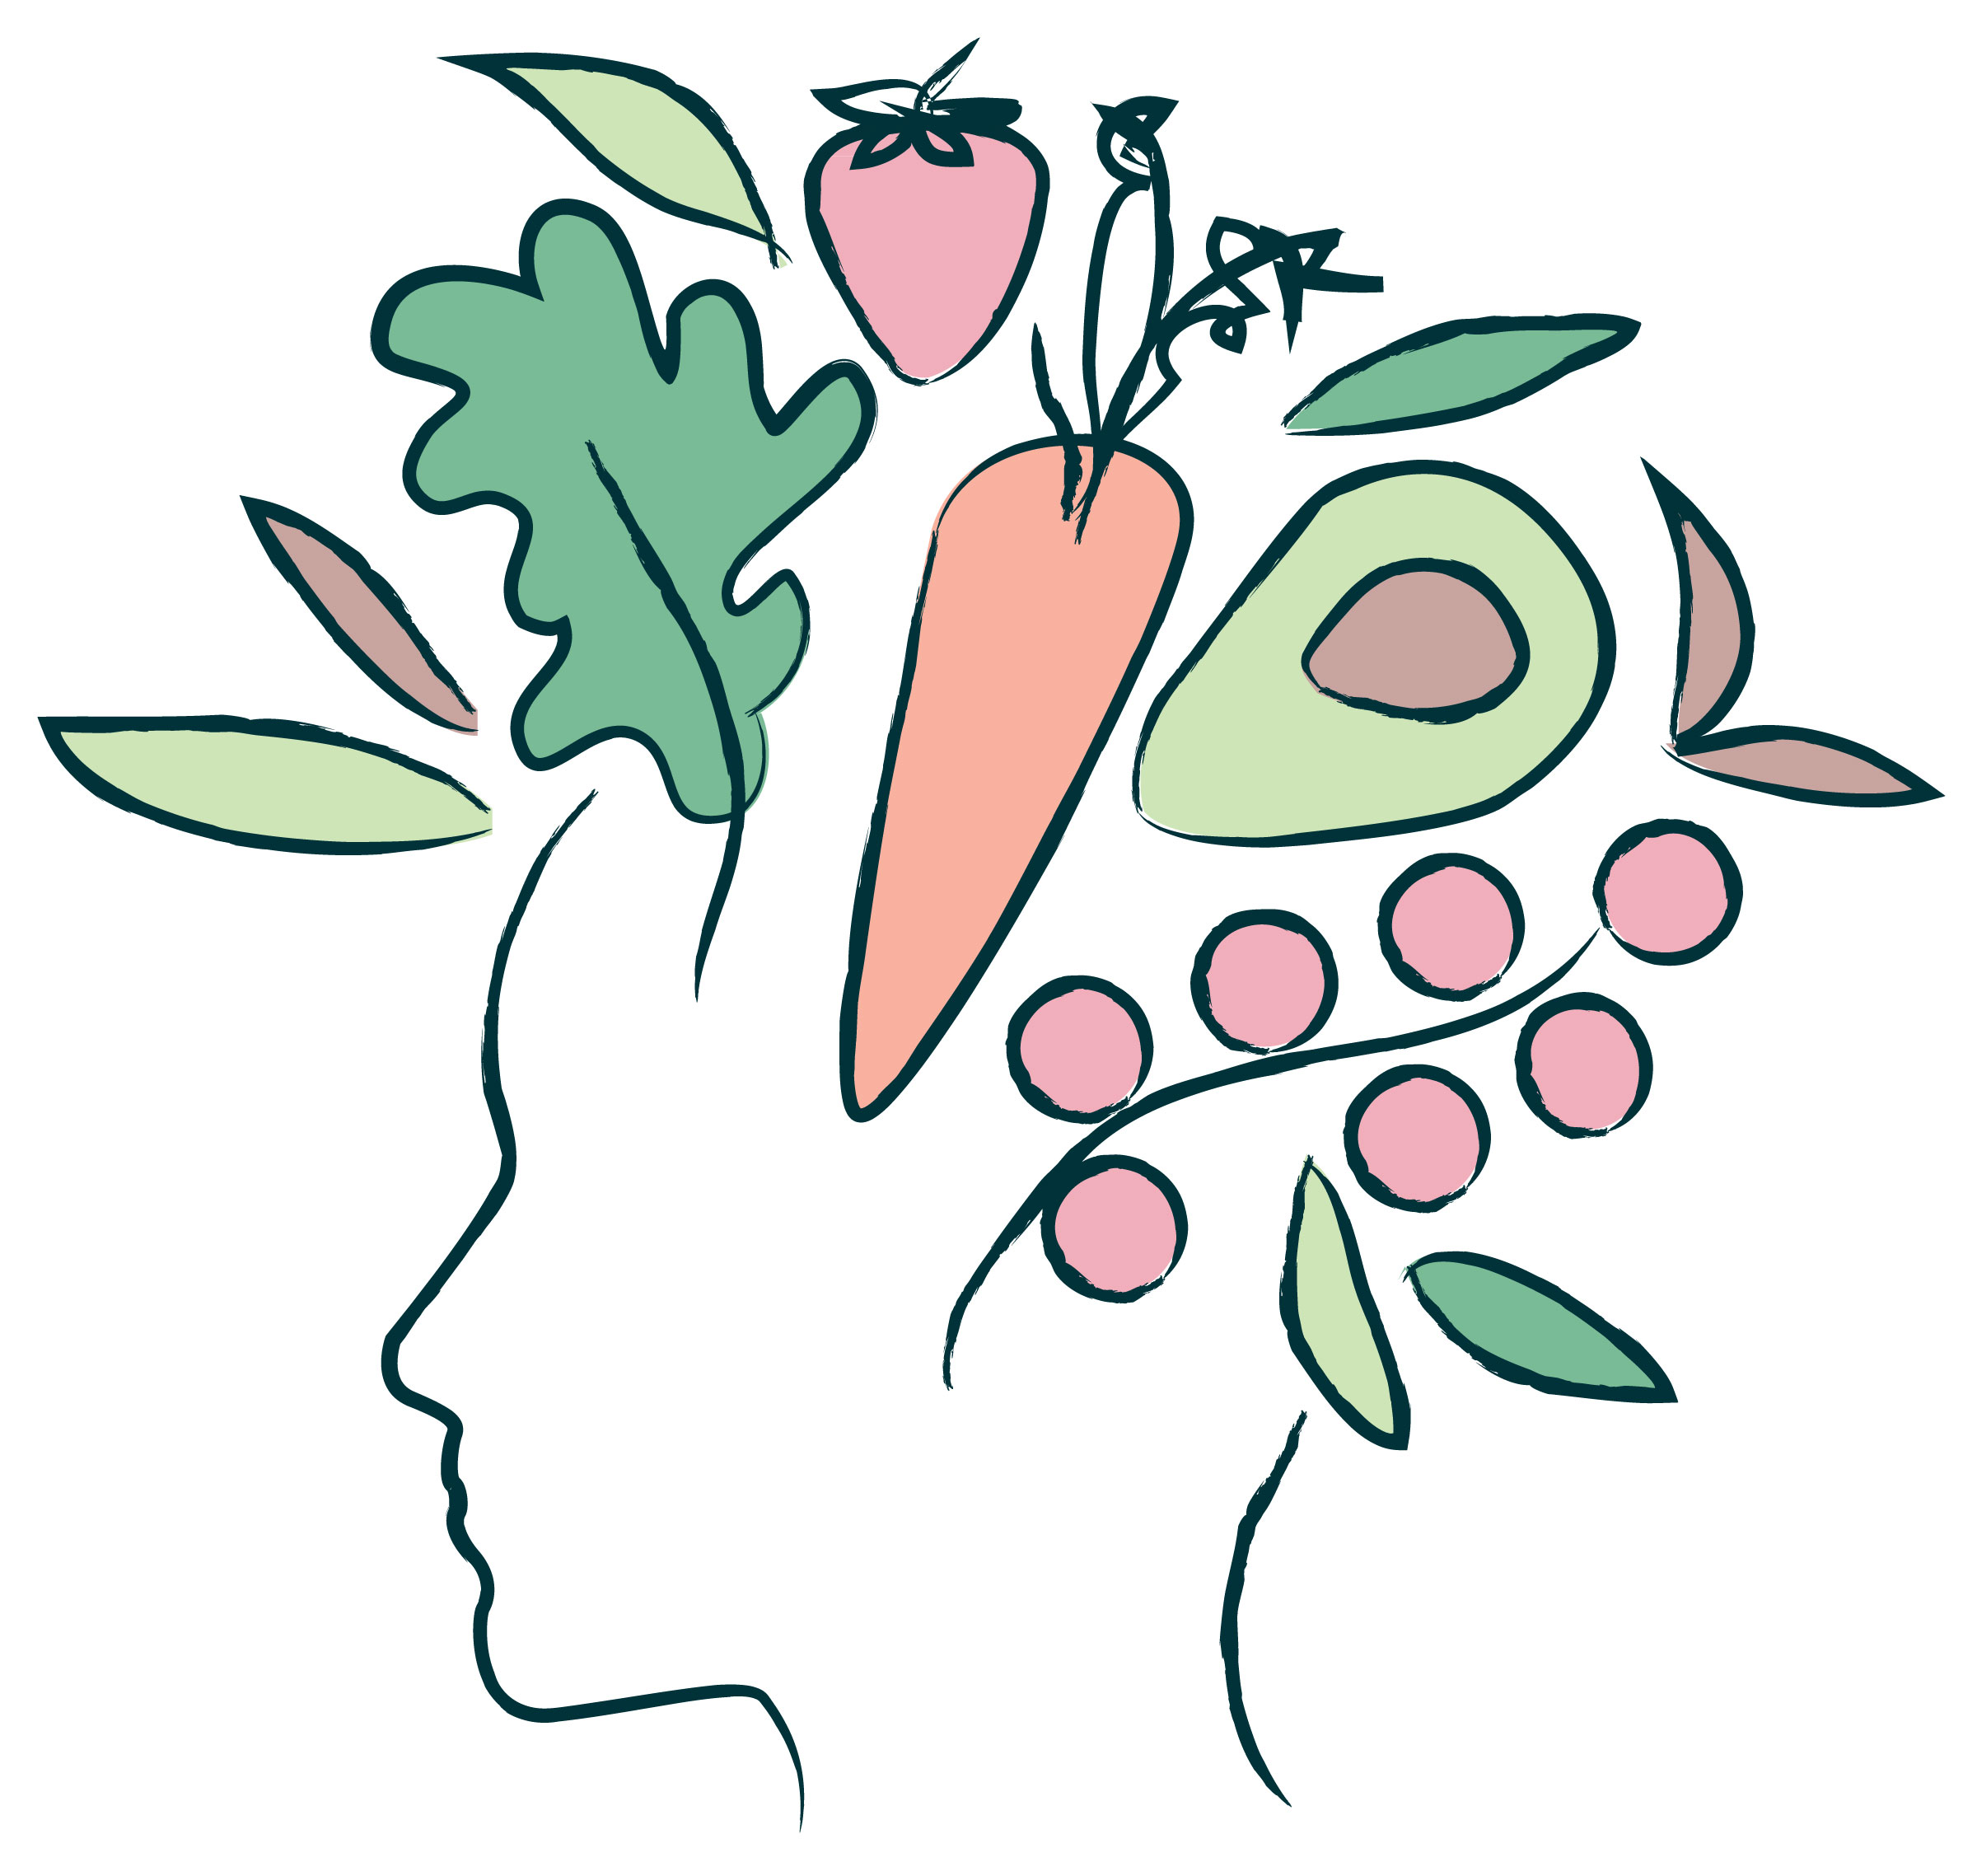 The Mindful cook logo